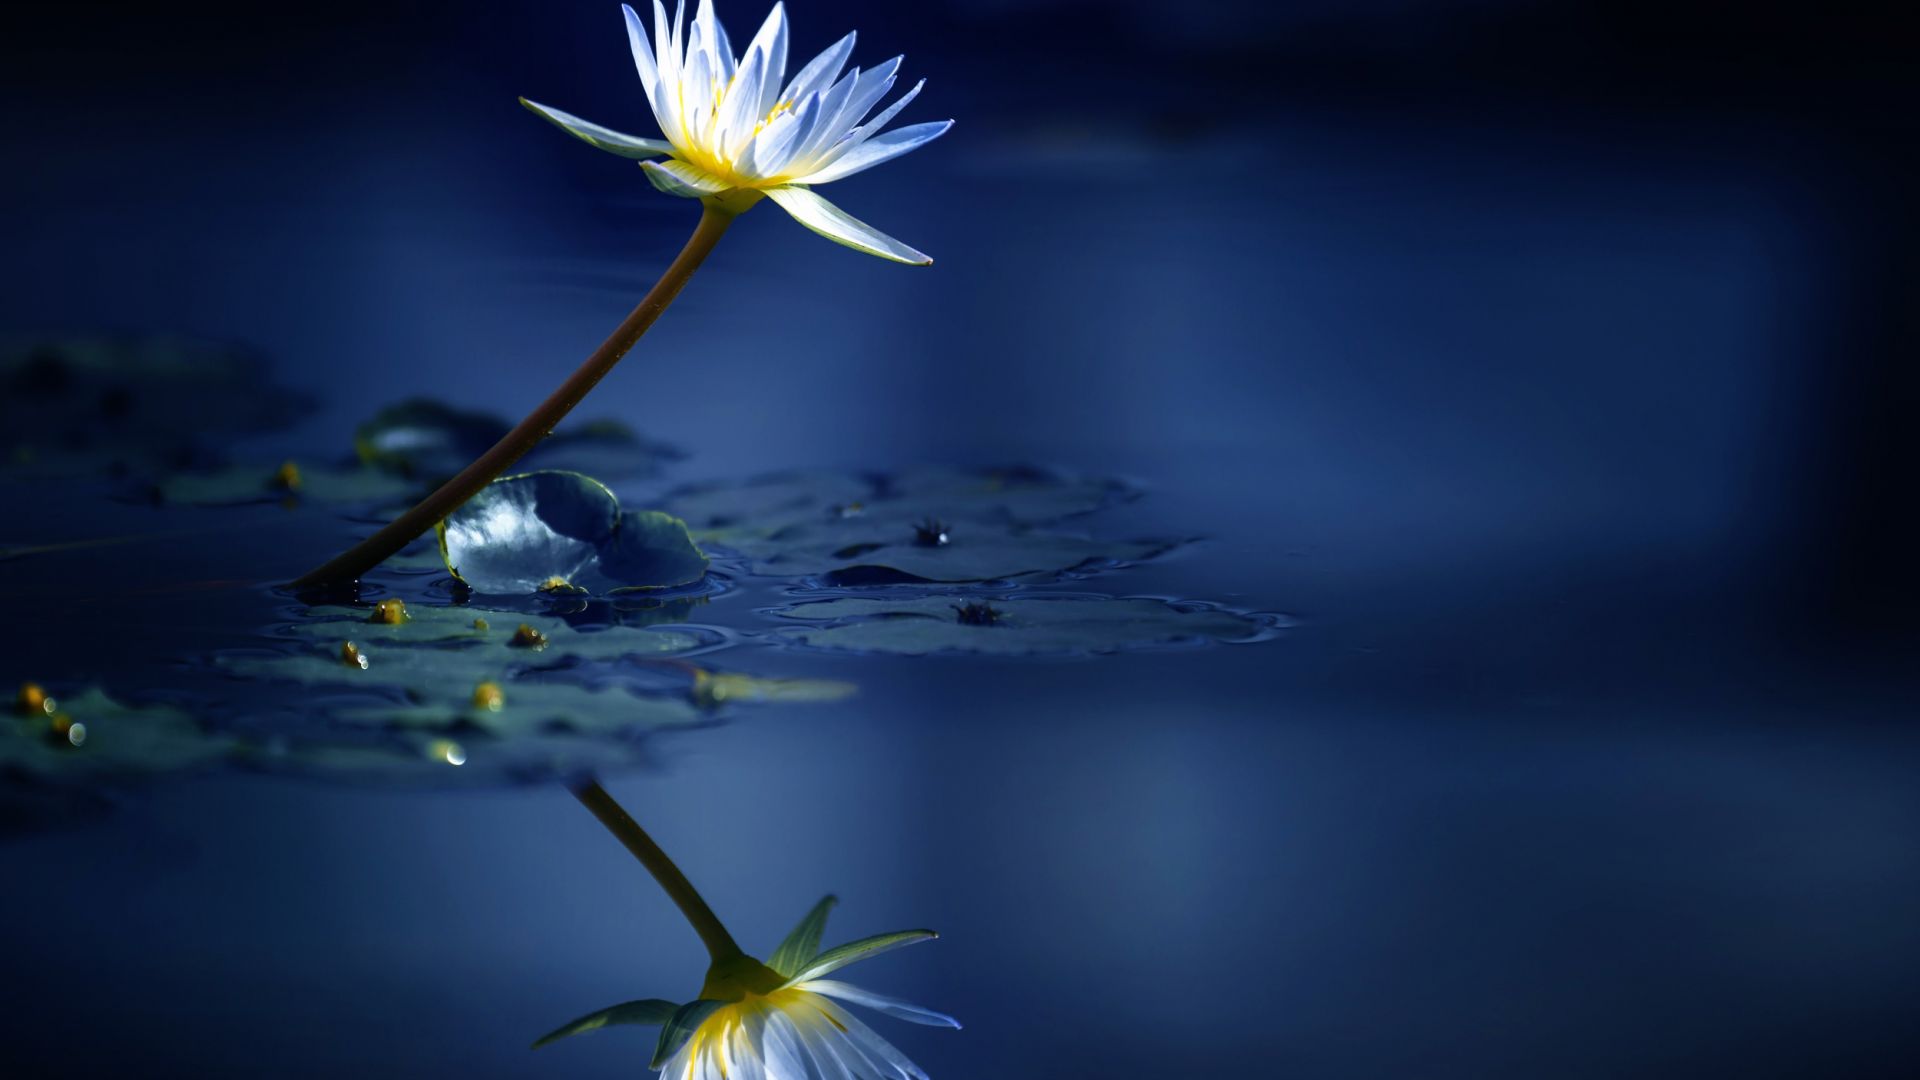 Wallpaper Reflections, lake, water lily, white flower